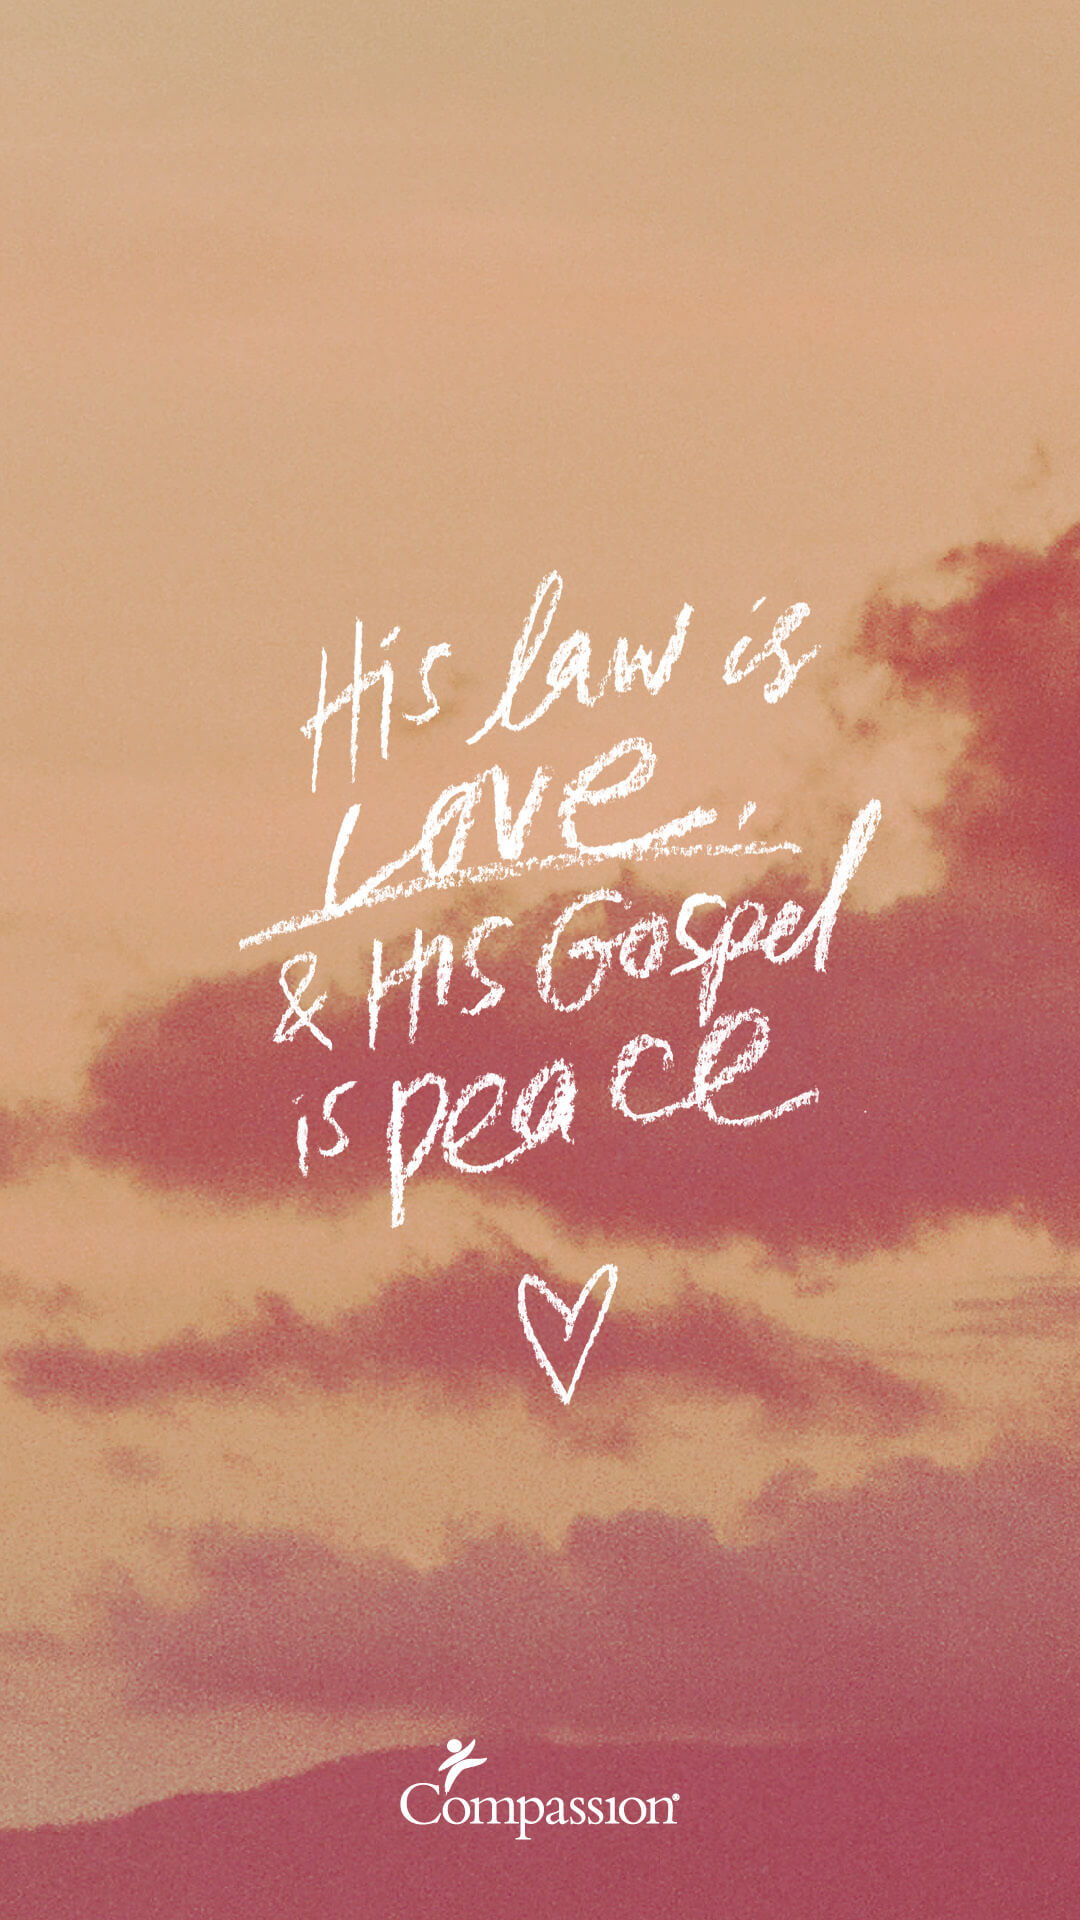  His law is love